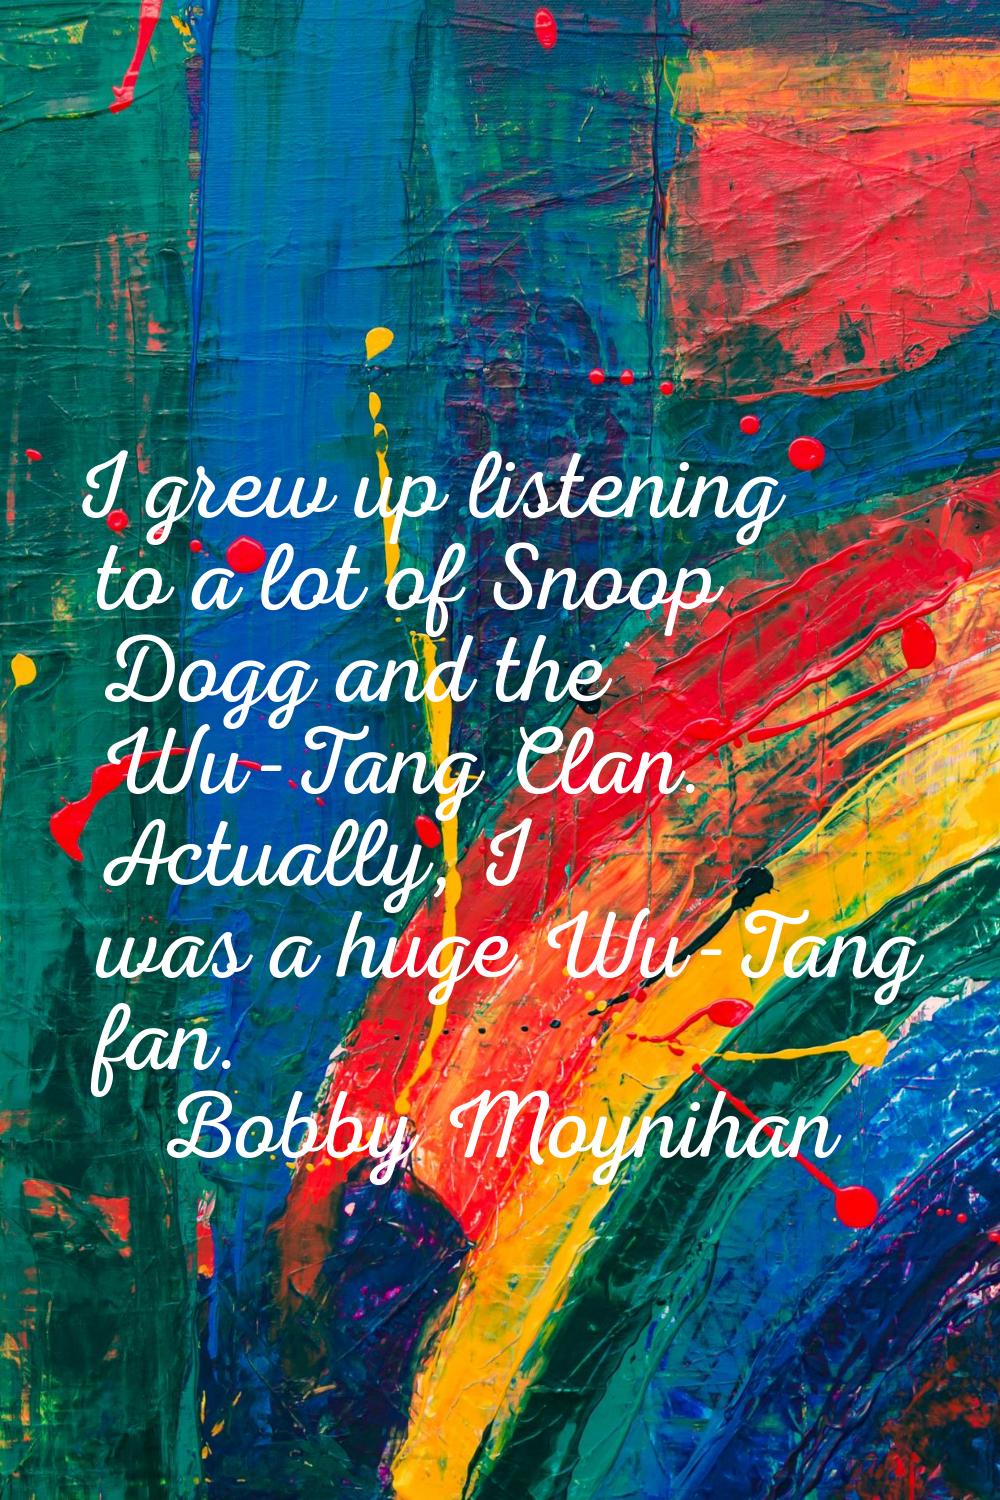 I grew up listening to a lot of Snoop Dogg and the Wu-Tang Clan. Actually, I was a huge Wu-Tang fan